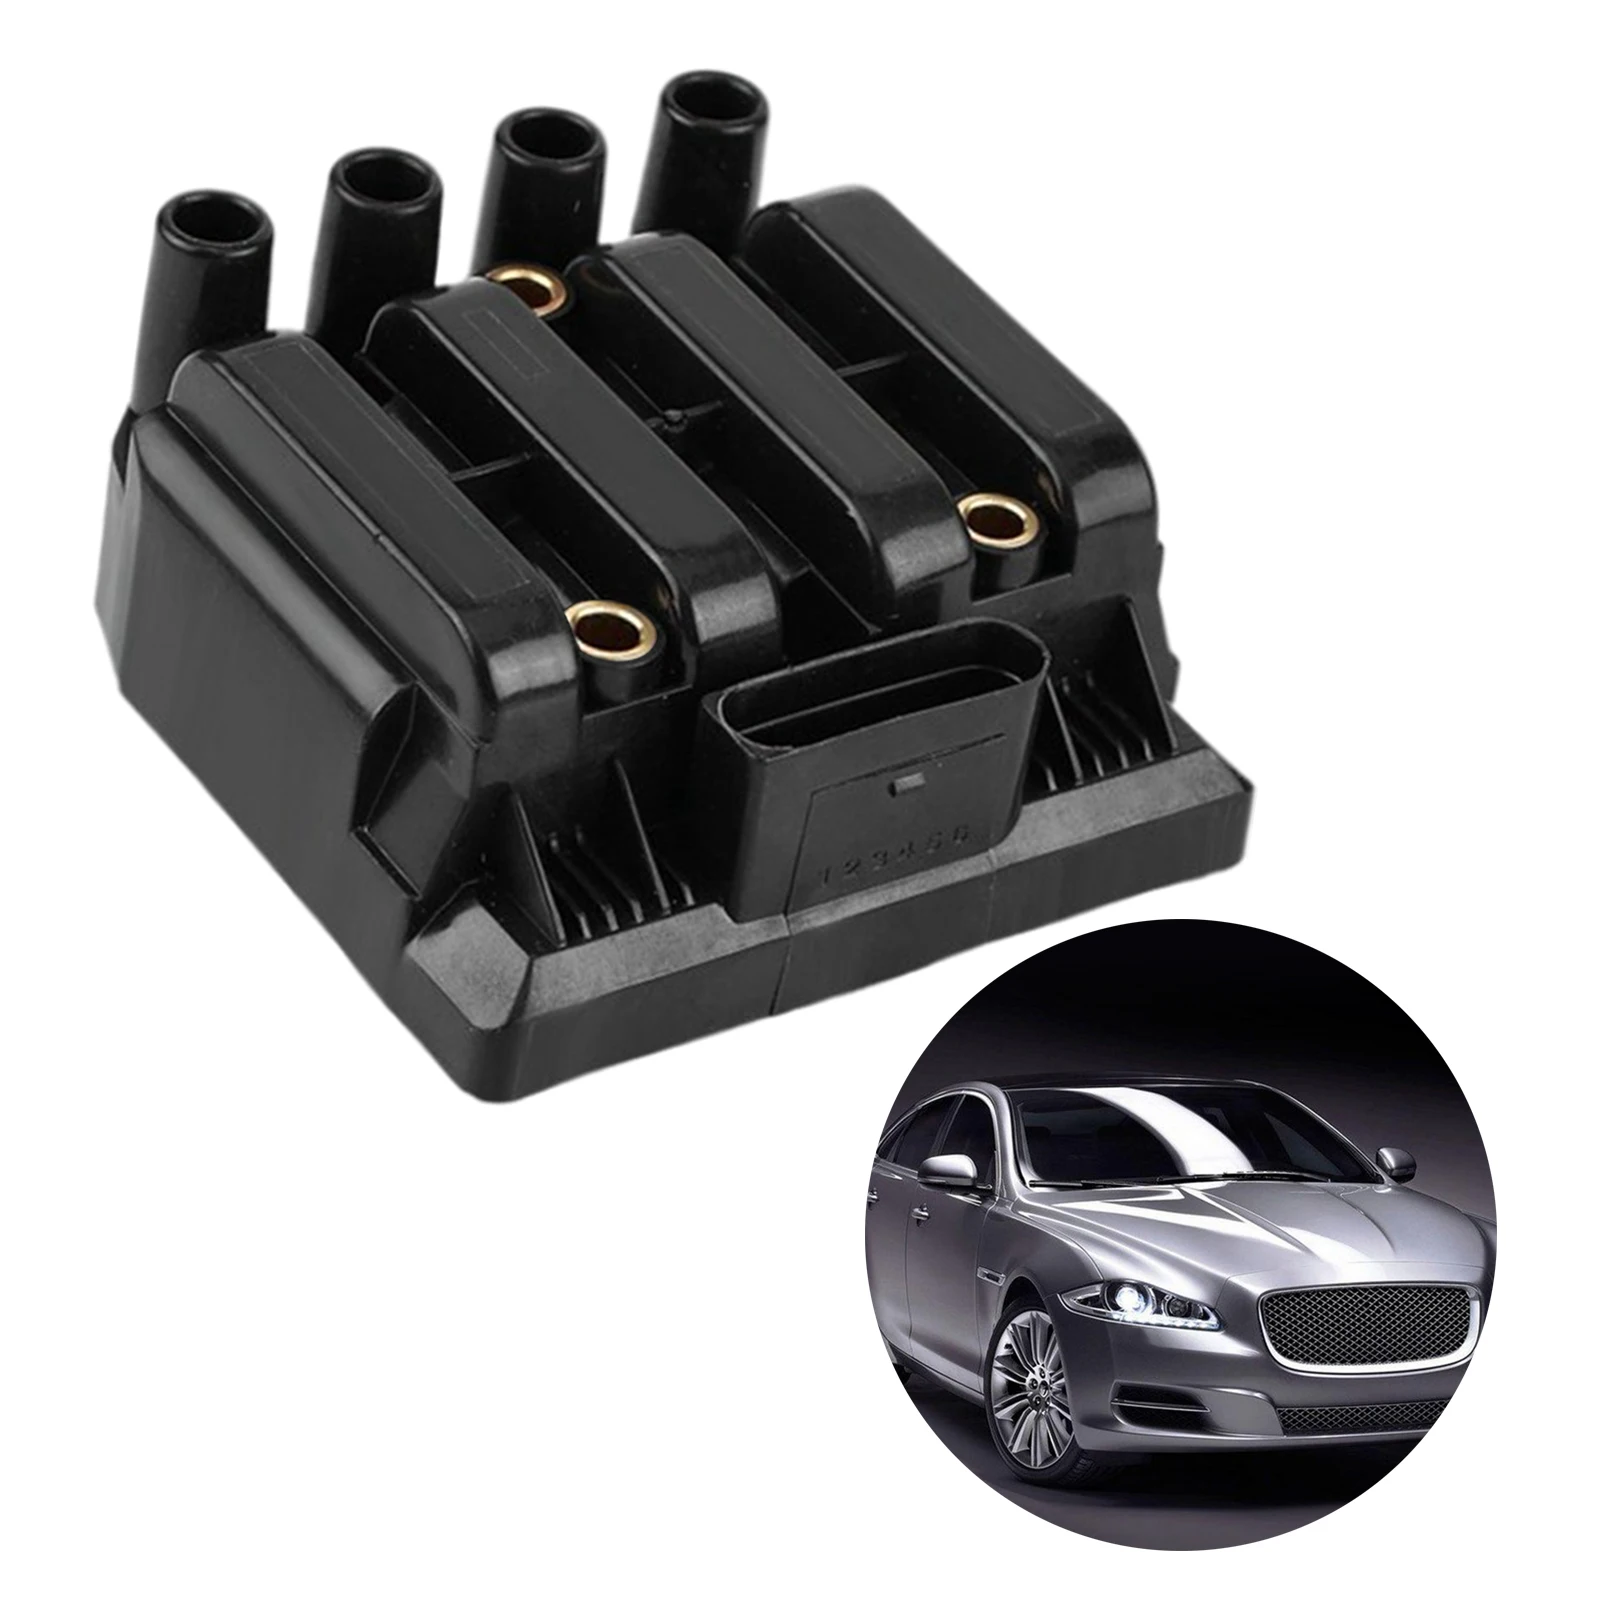 Portable Spare Car Ignition Coil UF484 Replacement For VW Jetta Beetle L4 2.0L C1393 2003 2004 Car Accessories